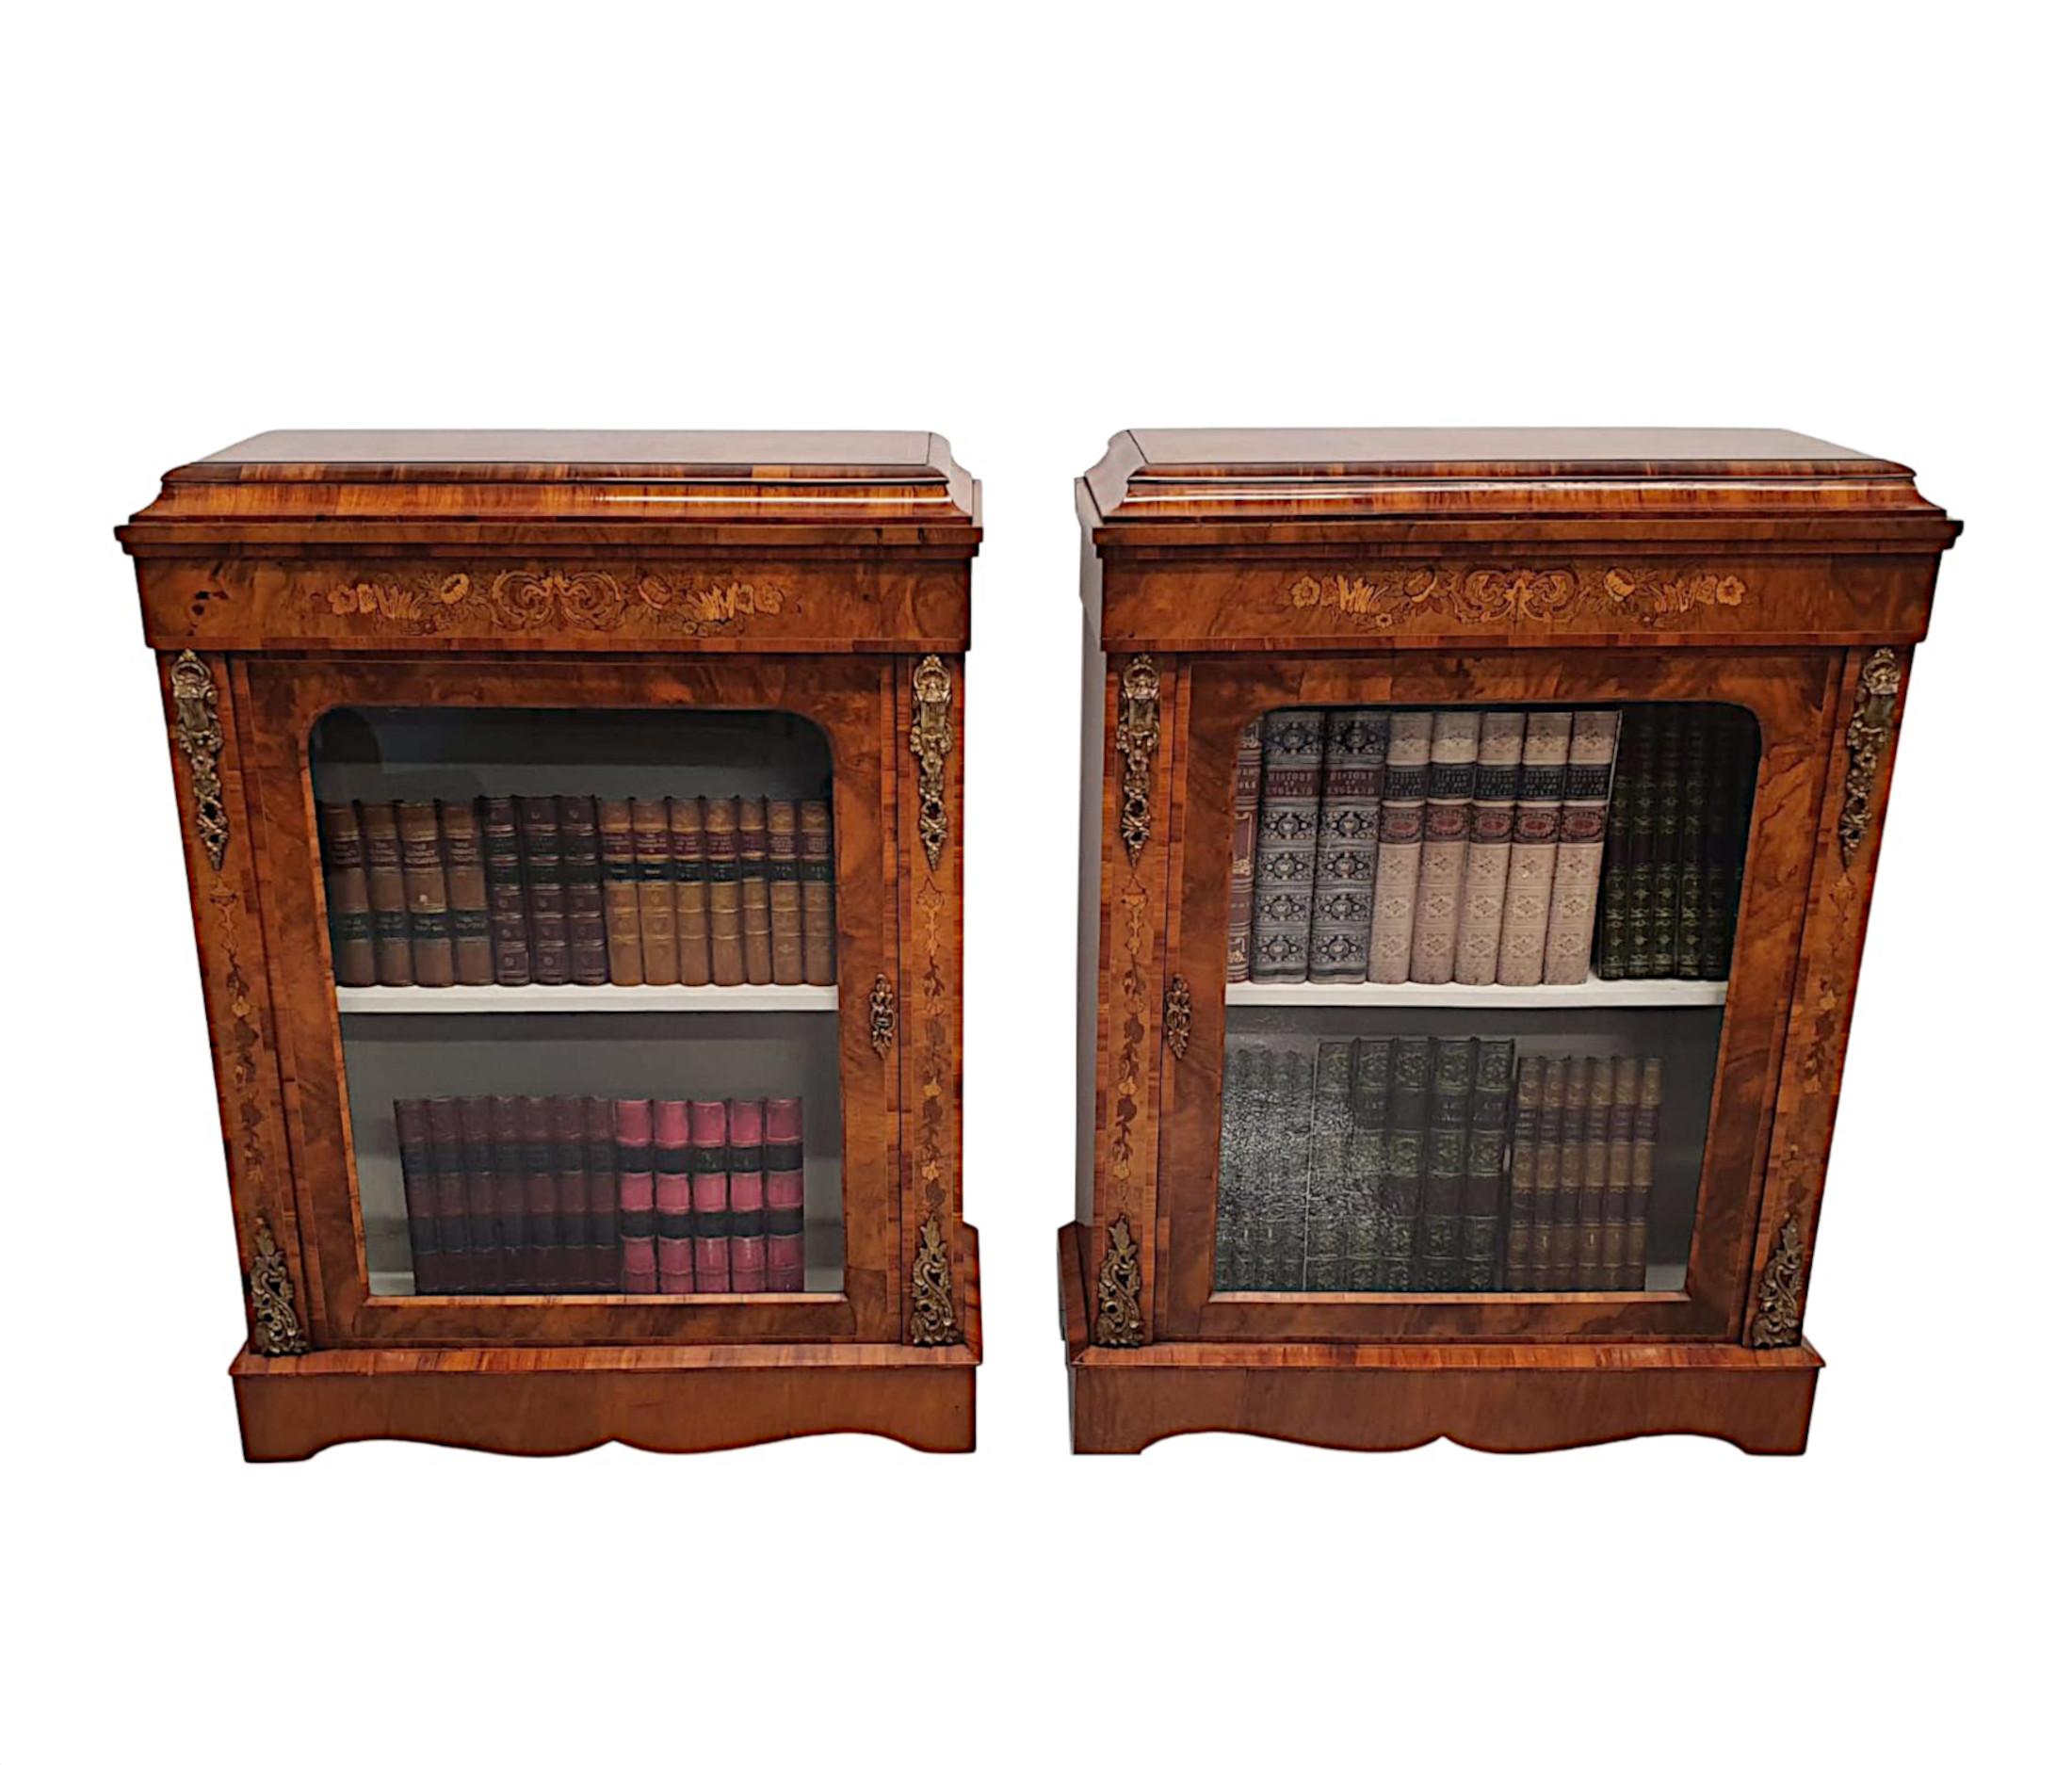 An exceptional pair of rare 19th century richly patinated walnut and tulipwood pier cabinets or bookcases, finely hand carved, cross banded, ormolu mounted and marquetry inlaid throughout. The well figured moulded top of rectangular form above